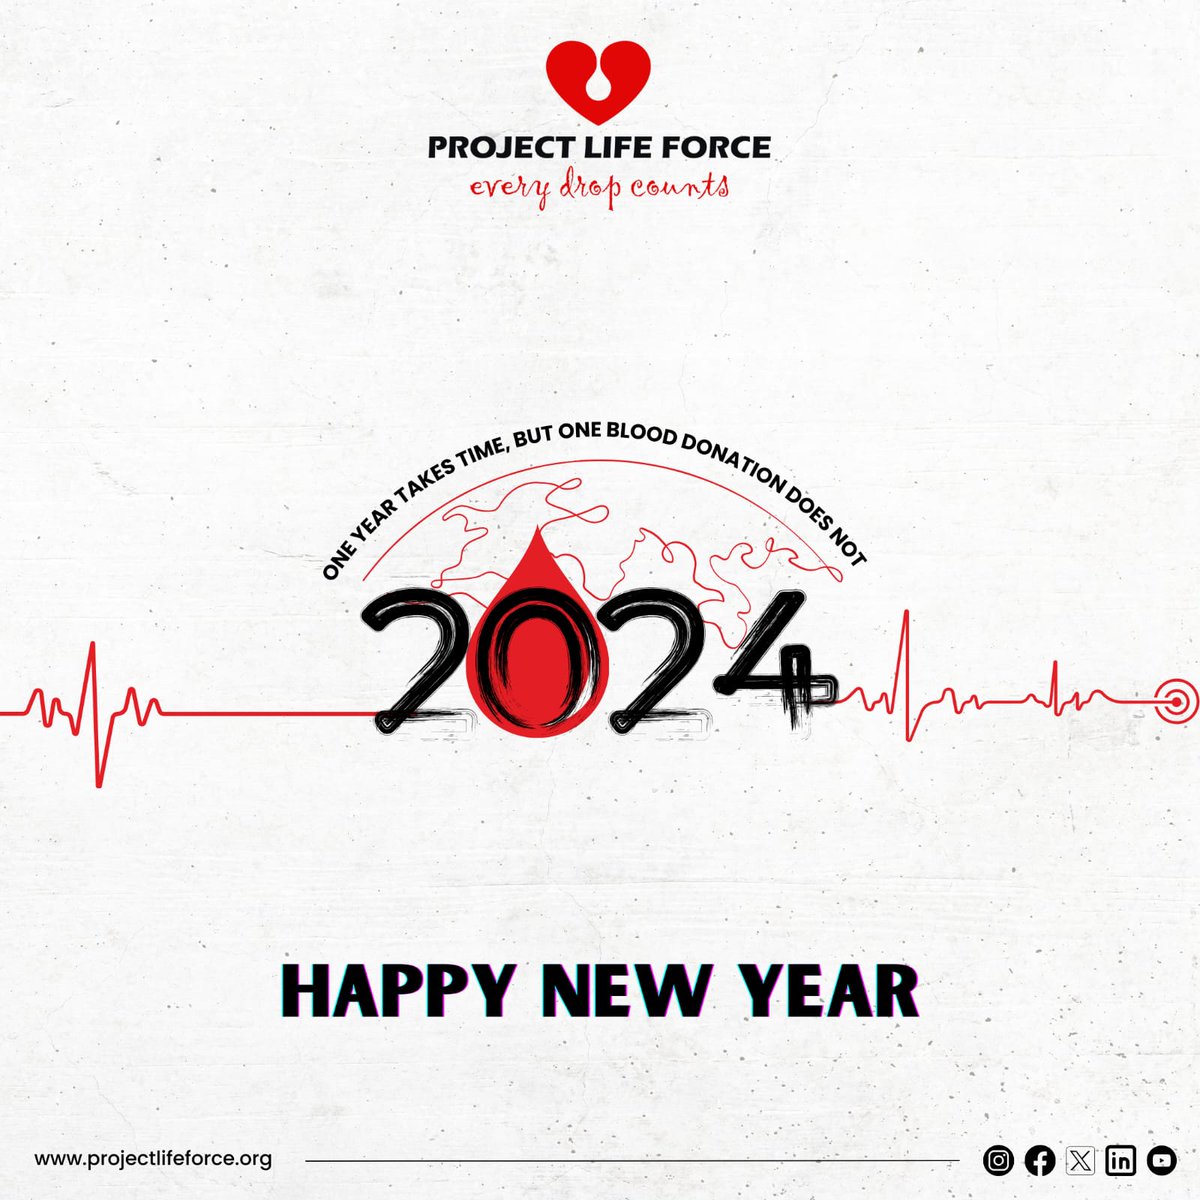 Wishing you all a very happy and prosperous New Year!

#projectlifeforce #plf #iamthechange #newyear2024 #happynewyear2024 #2024NewYear #blooddonation #socialwork #blooddeficit